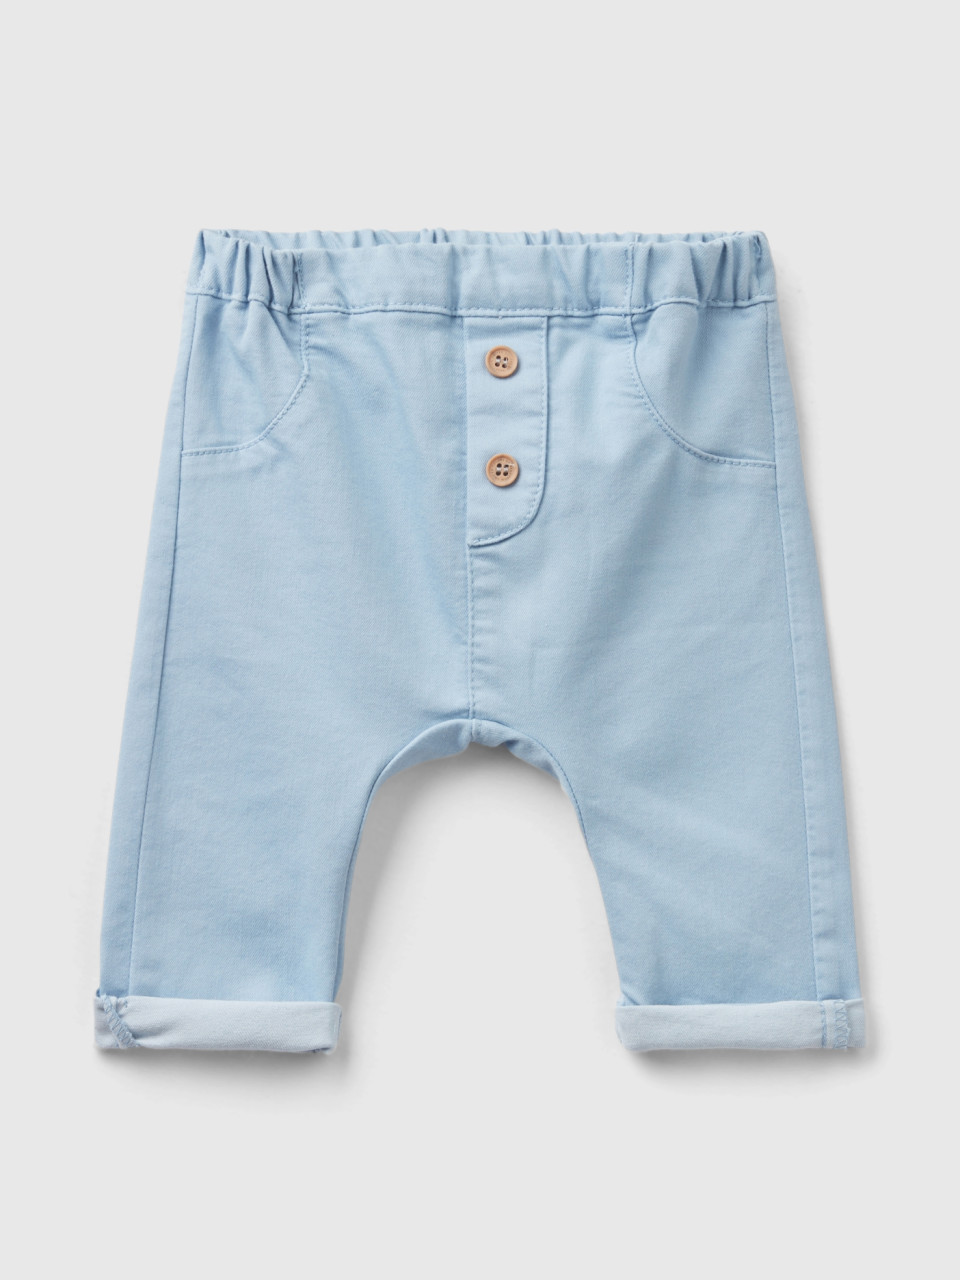 Benetton, Trousers In Stretch Cotton Blend, Sky Blue, Kids